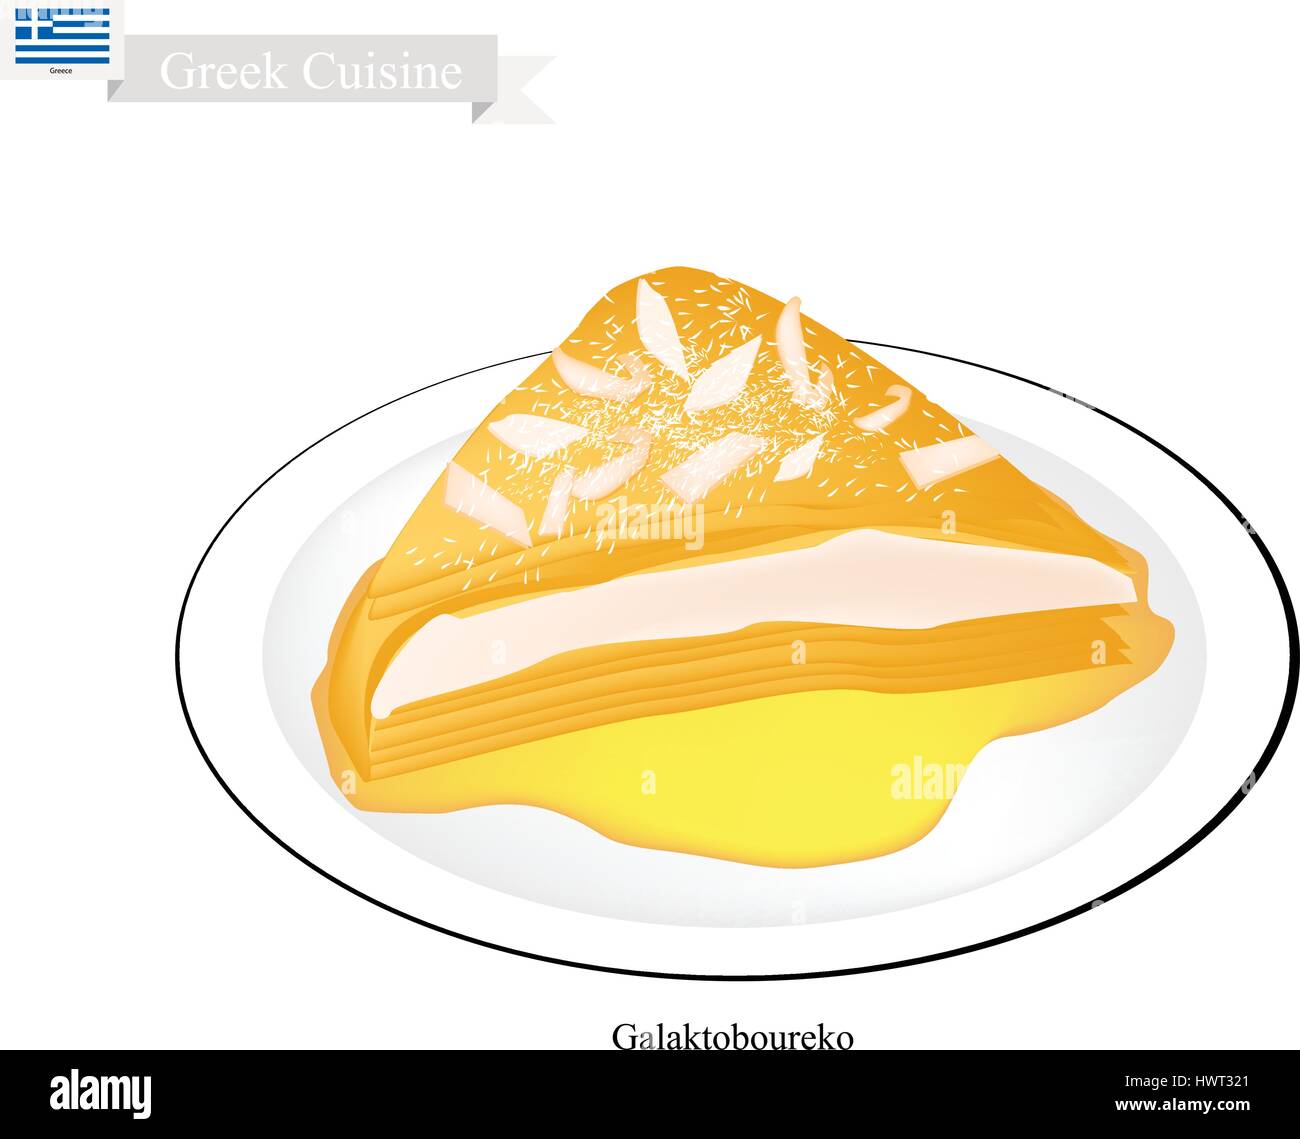 Greek Cuisine, Galaktoboureko or Traditional Custard Pie With Phyllo Dough Coated with Syrup. One of The Most Popular Dessert in Greece. Stock Vector